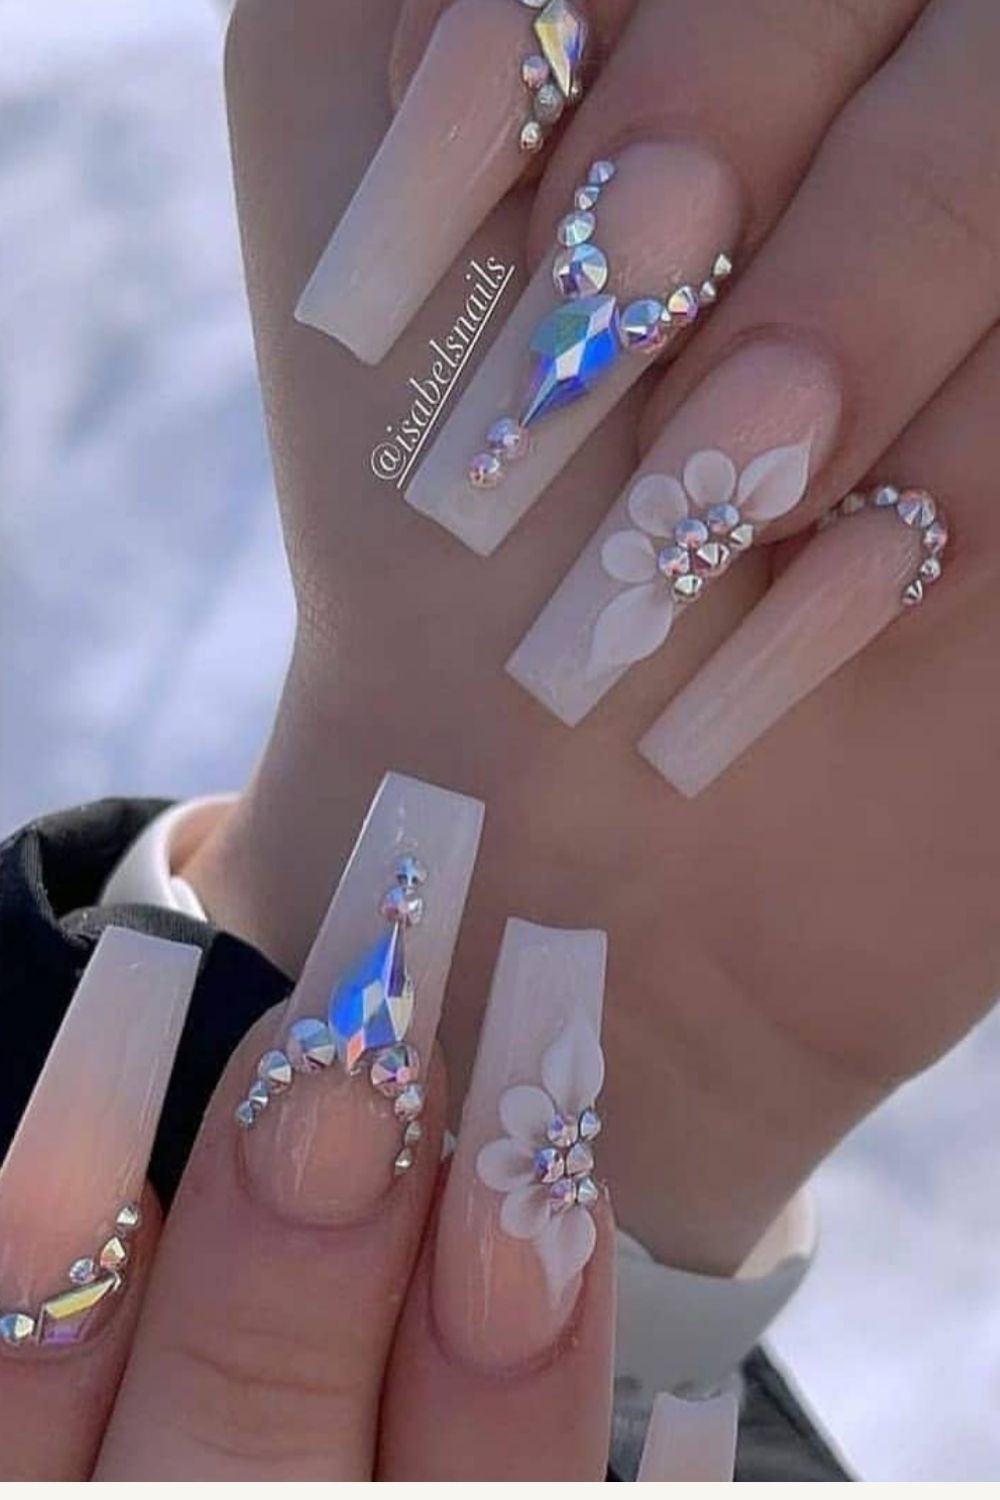 Acrylic Glitter coffin nails designs for Summer 2021!